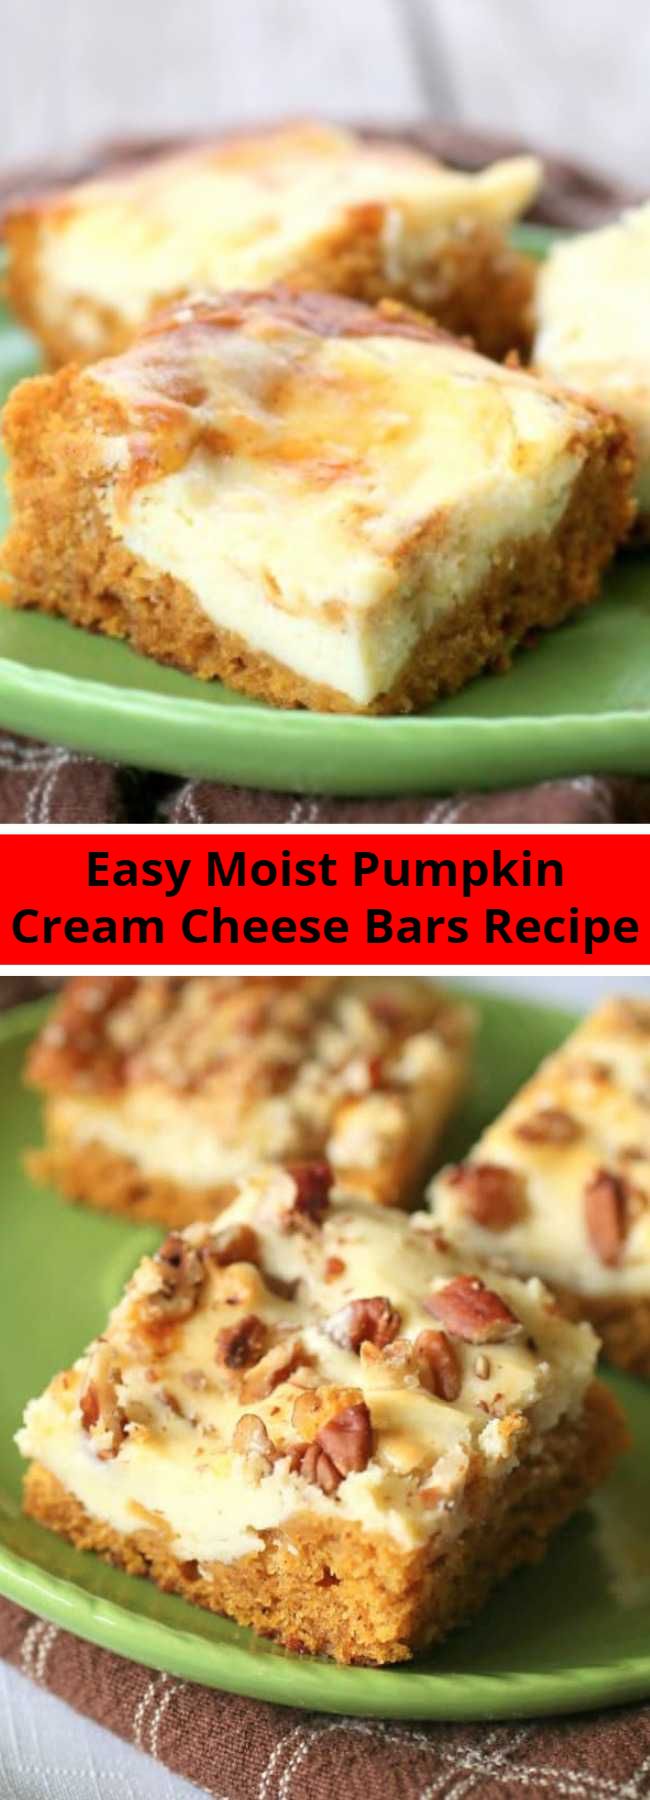 Easy Moist Pumpkin Cream Cheese Bars Recipe - These Pumpkin Cream Cheese Bars are moist pumpkin bars with swirls of cream cheese frosting throughout. This dessert will be on your fall treat recipe list every year.